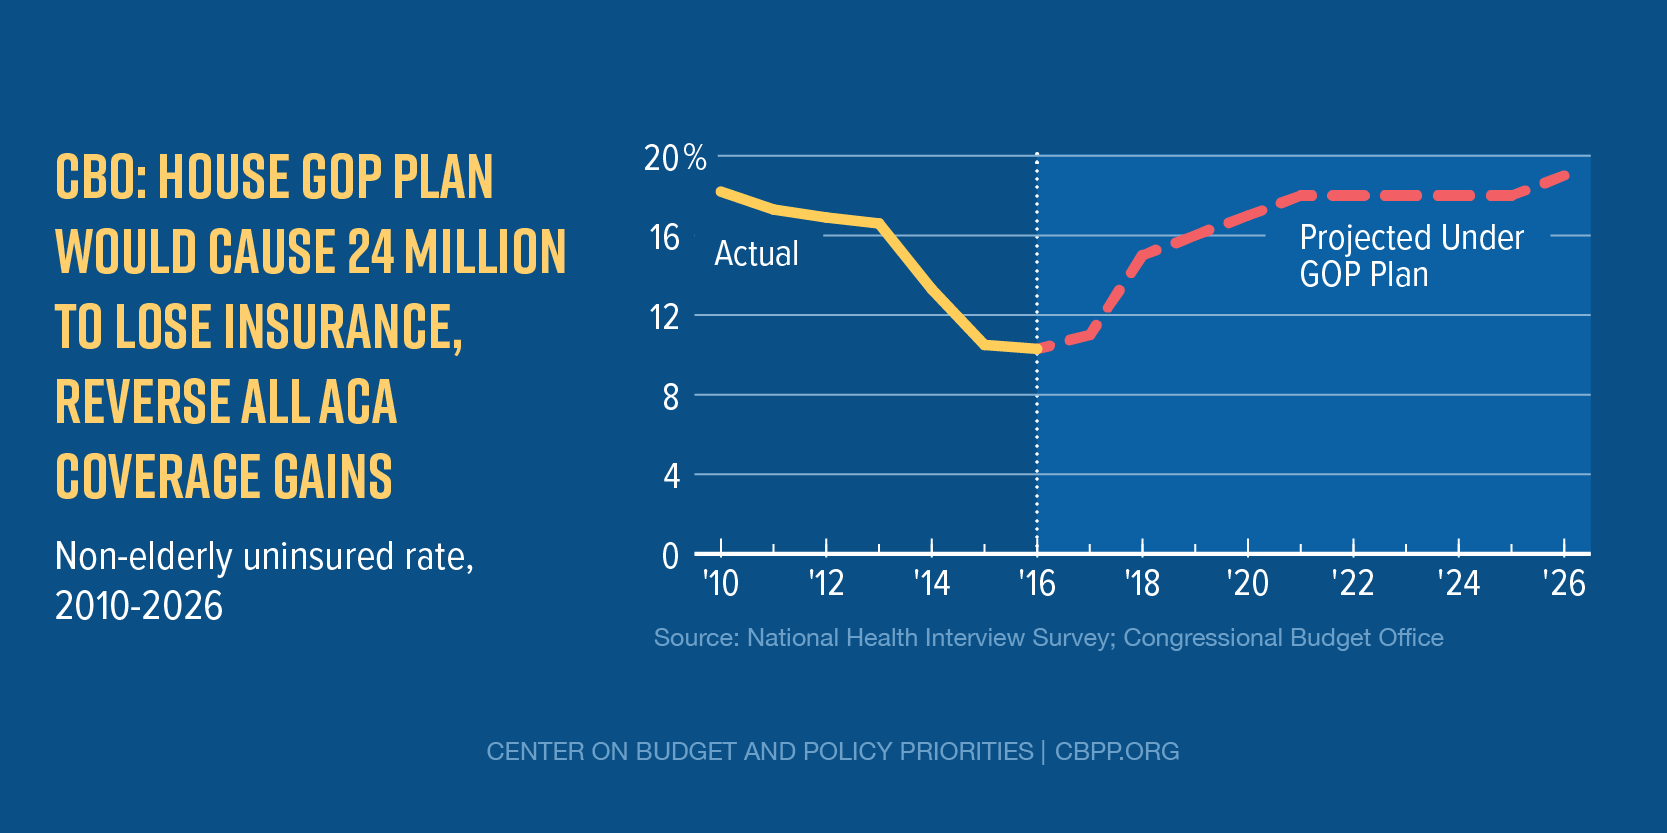 CBO: House GOP Plan Would Cause 24 Million to Lose Insurance, Reverse All ACA Coverage Gains